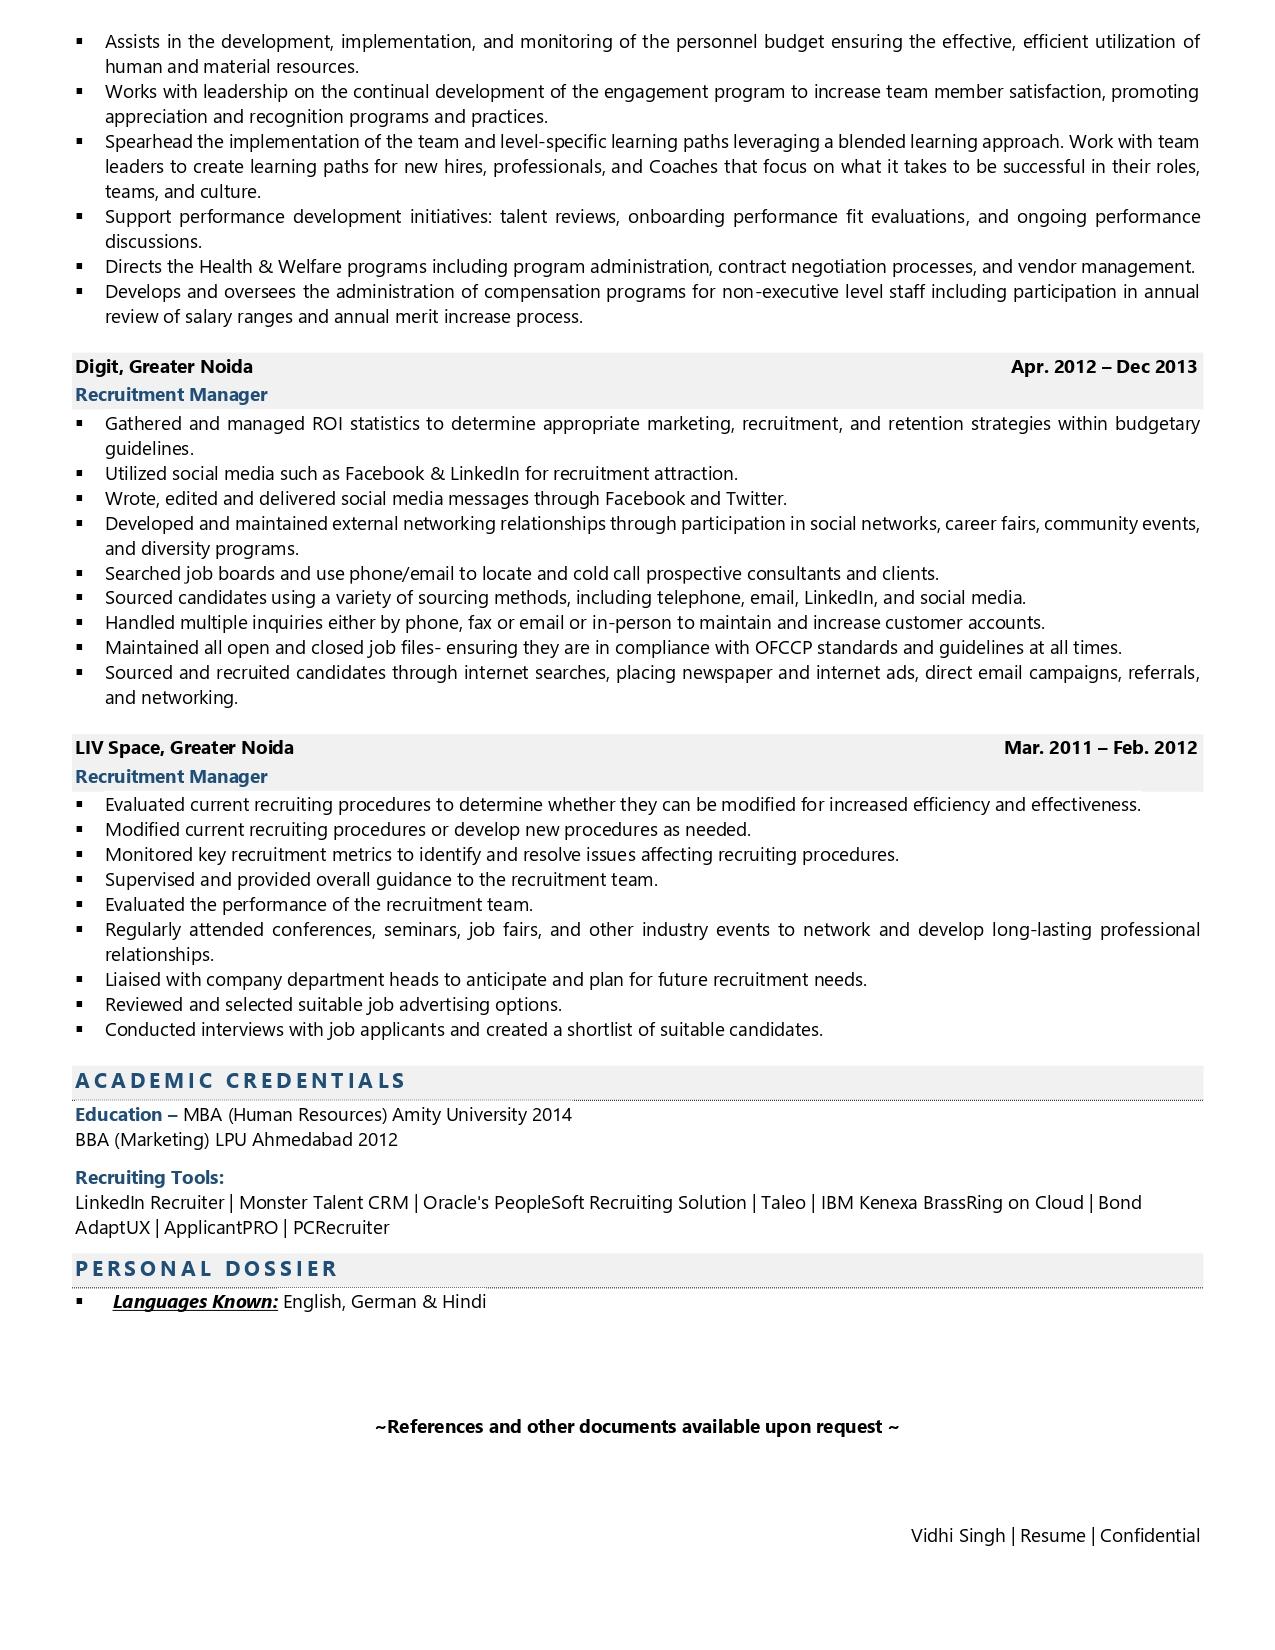 Recruitment Manager - Resume Example & Template